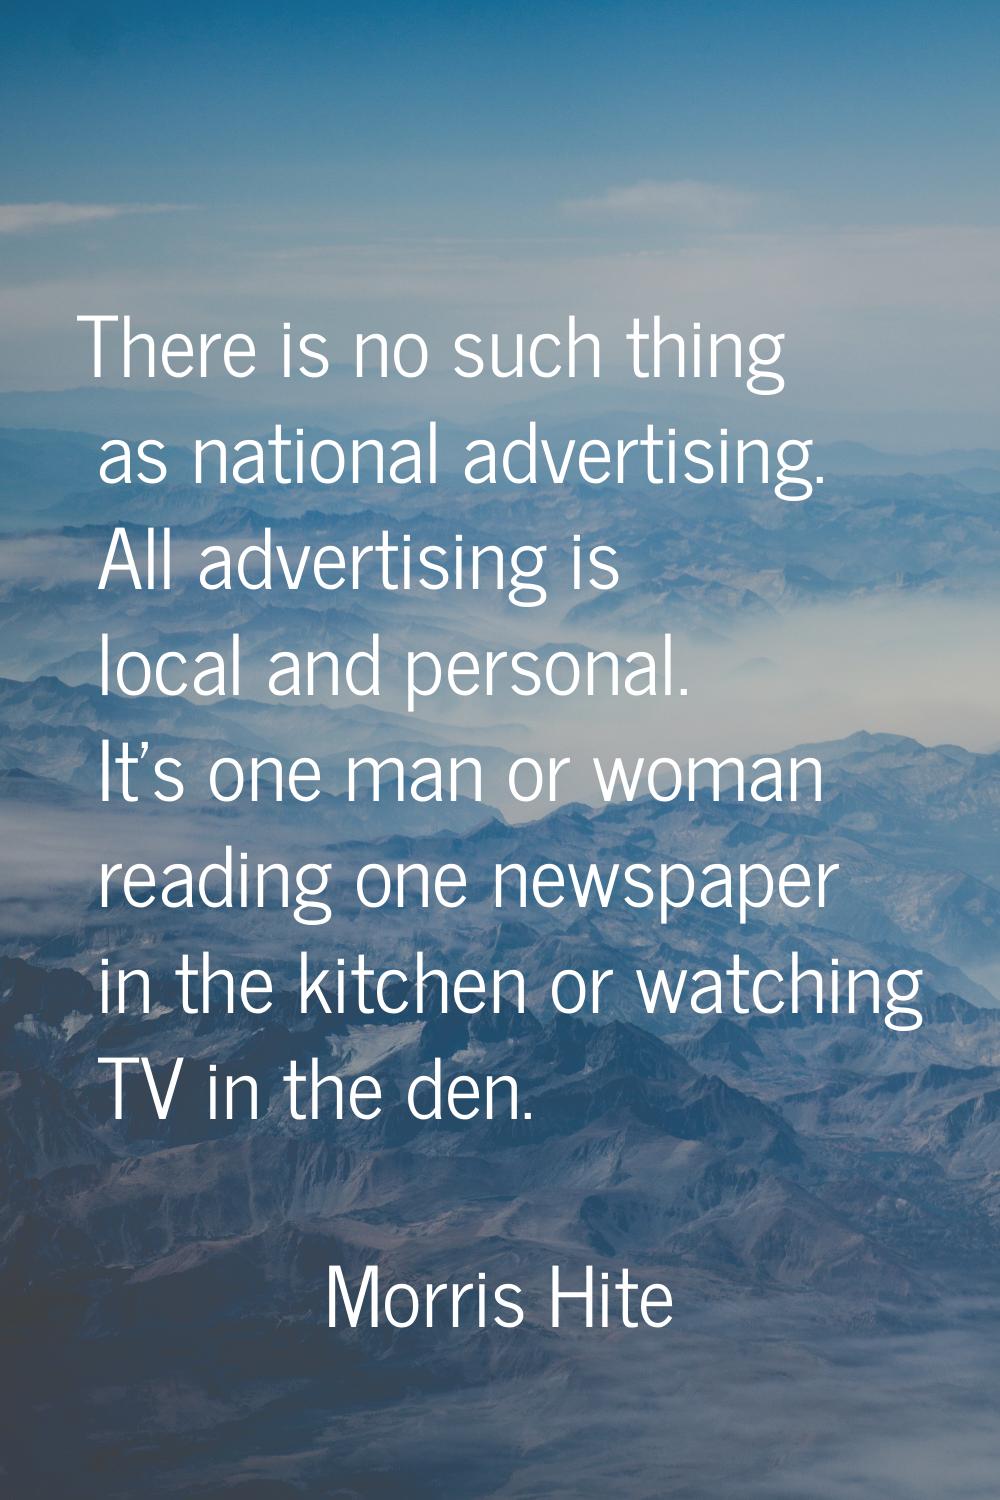 There is no such thing as national advertising. All advertising is local and personal. It's one man